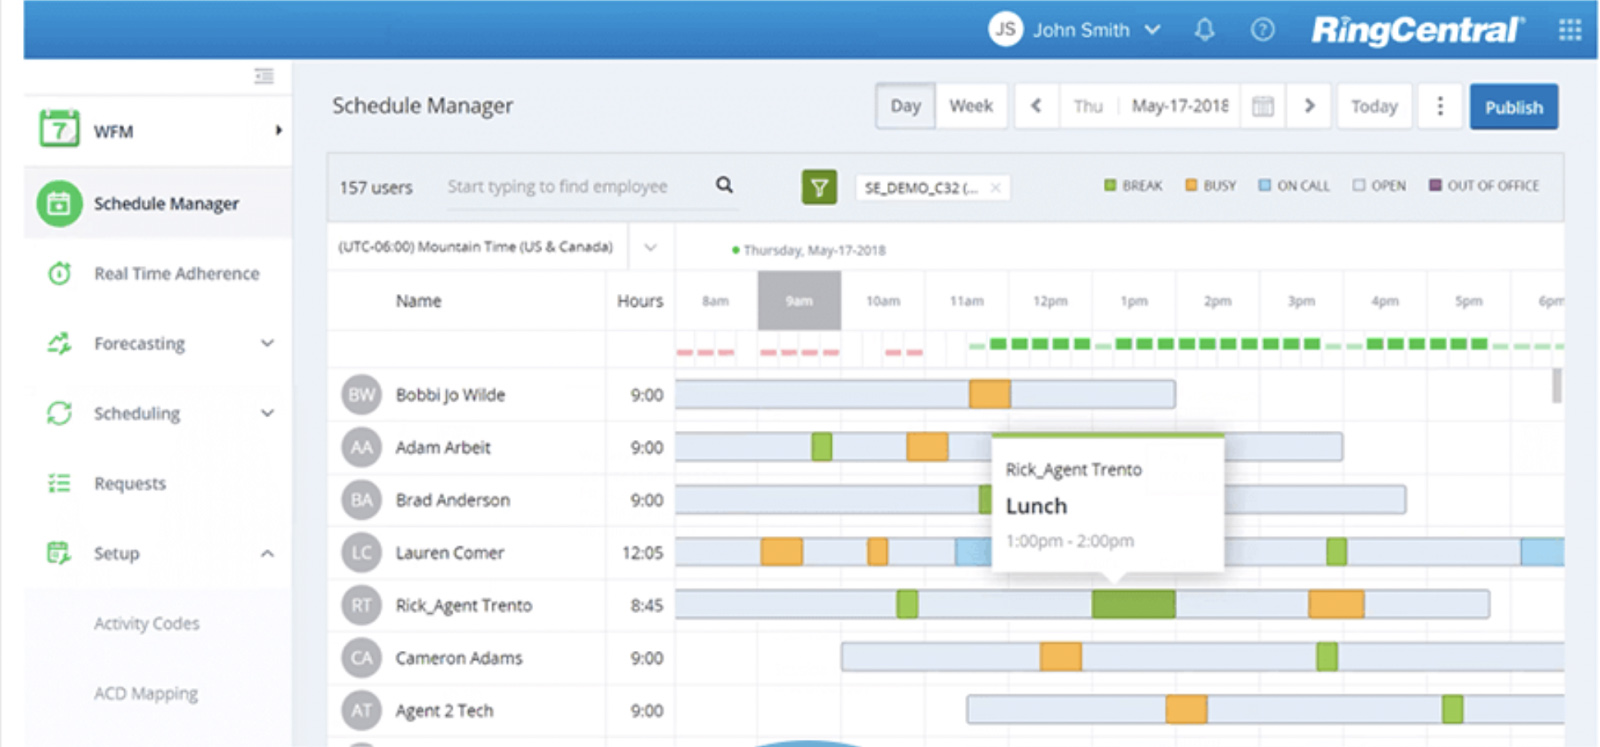 RingCentral Contact Center schedule manager page.